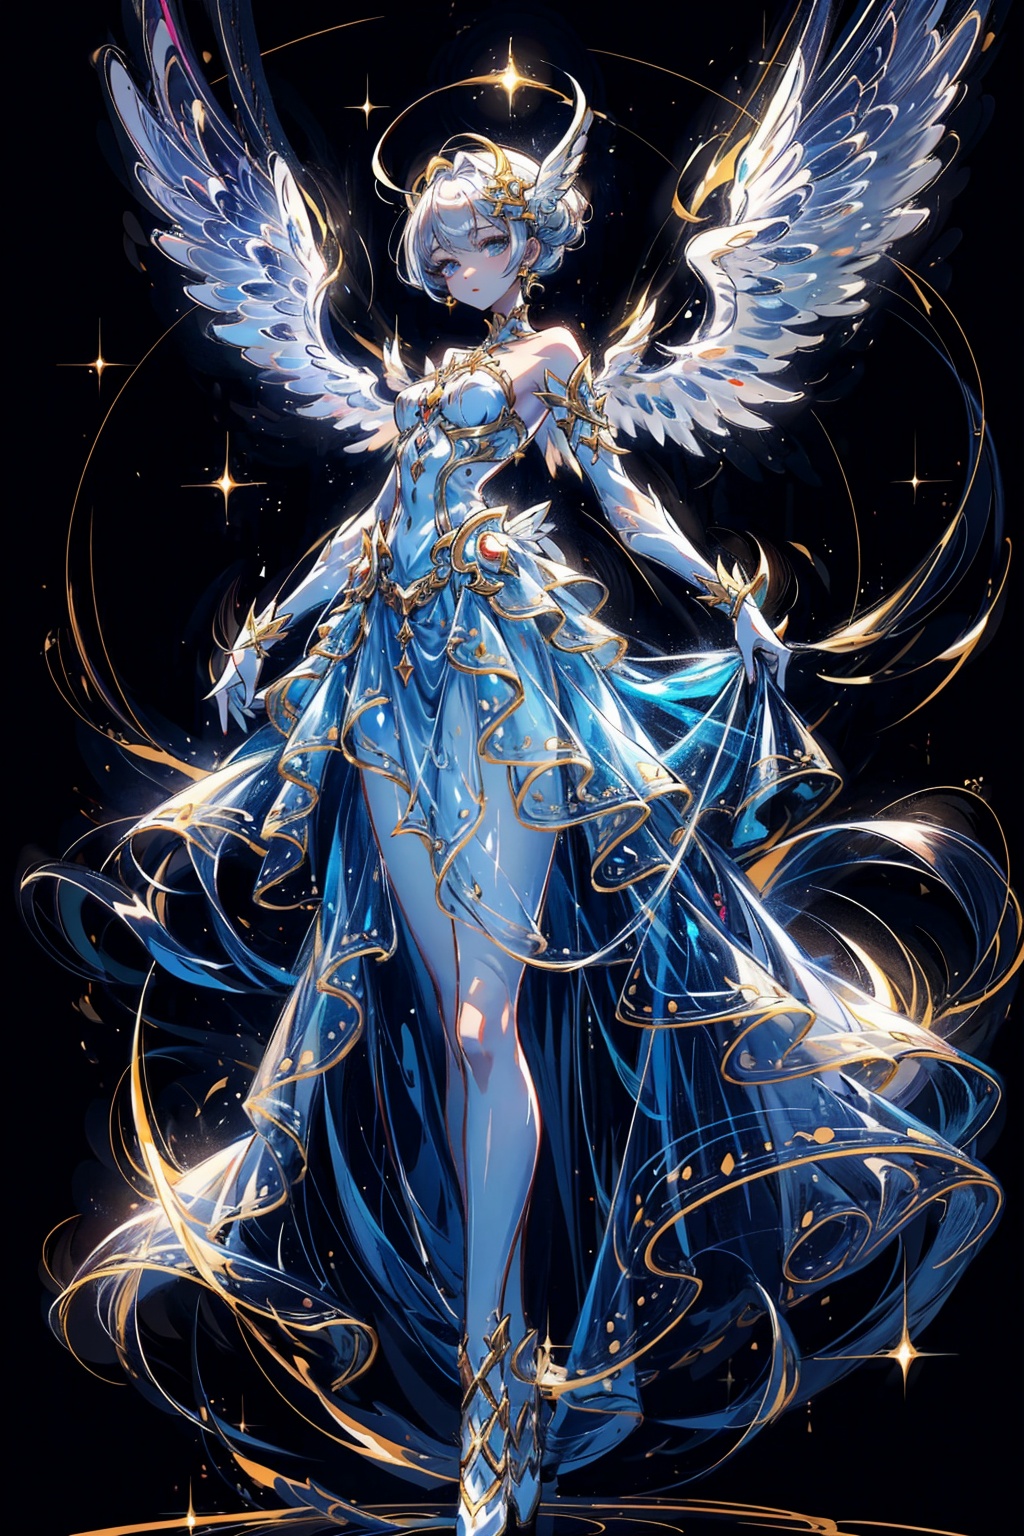  Best quality, 8k, cg, 
a close up of a person in a dress with a light on, an anime drawing by Marie Angel, trending on pixiv, fantasy art, glowing angelic being, astral fairy, white glowing aura, ethereal wings, ethereal angelic being of light, ethereal essence, ethereal anime, ethereal!!!, ethereal!!!!!!!, big white glowing wings, beautiful angel, angelic purity